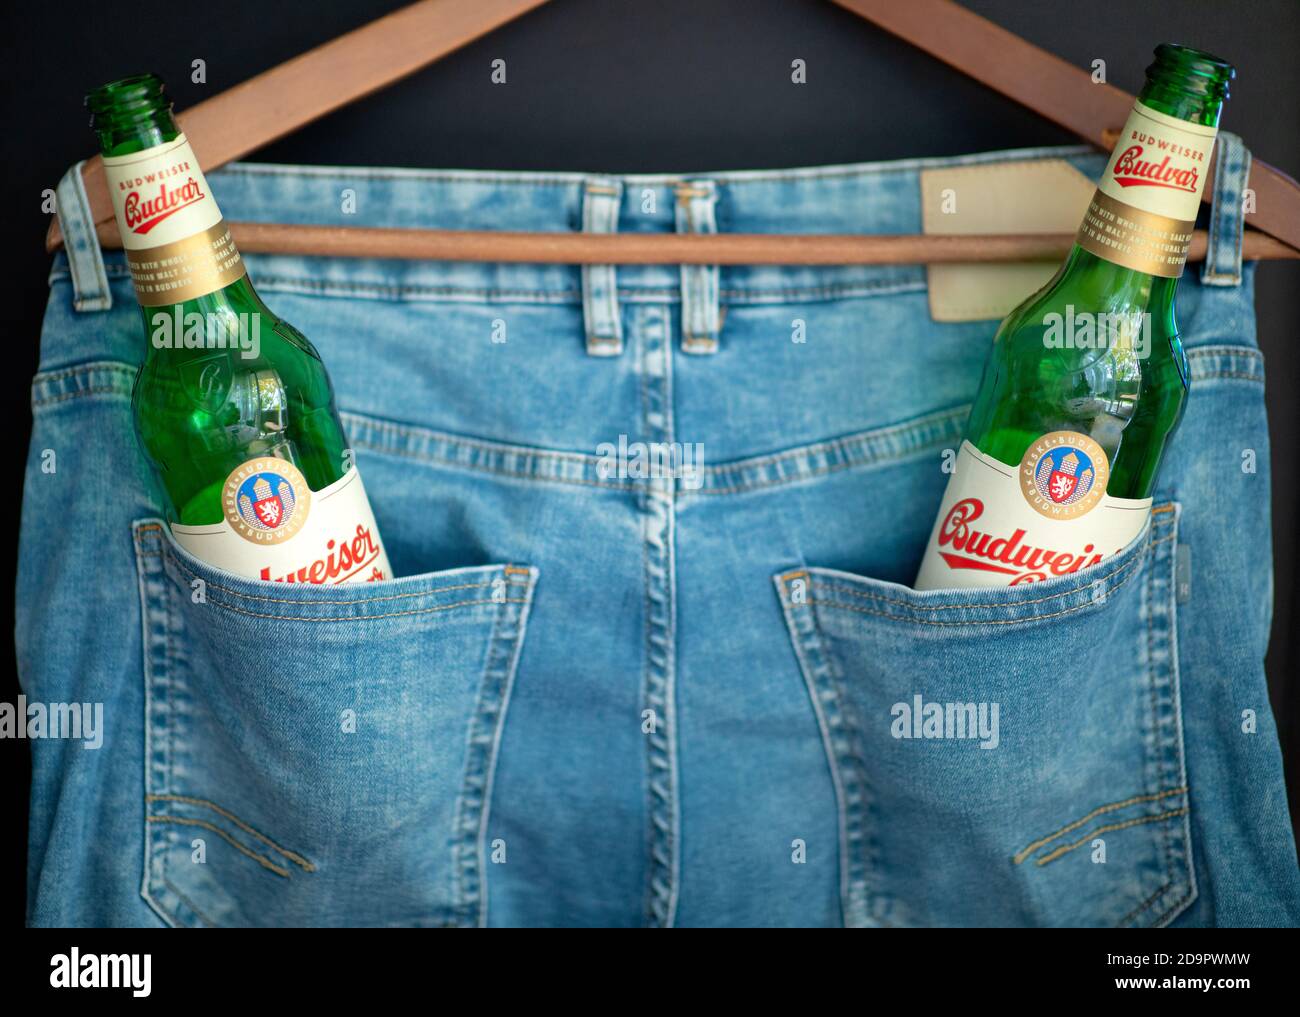 Two green empty Budweiser beer bottles in a pants pocket. Stock Photo